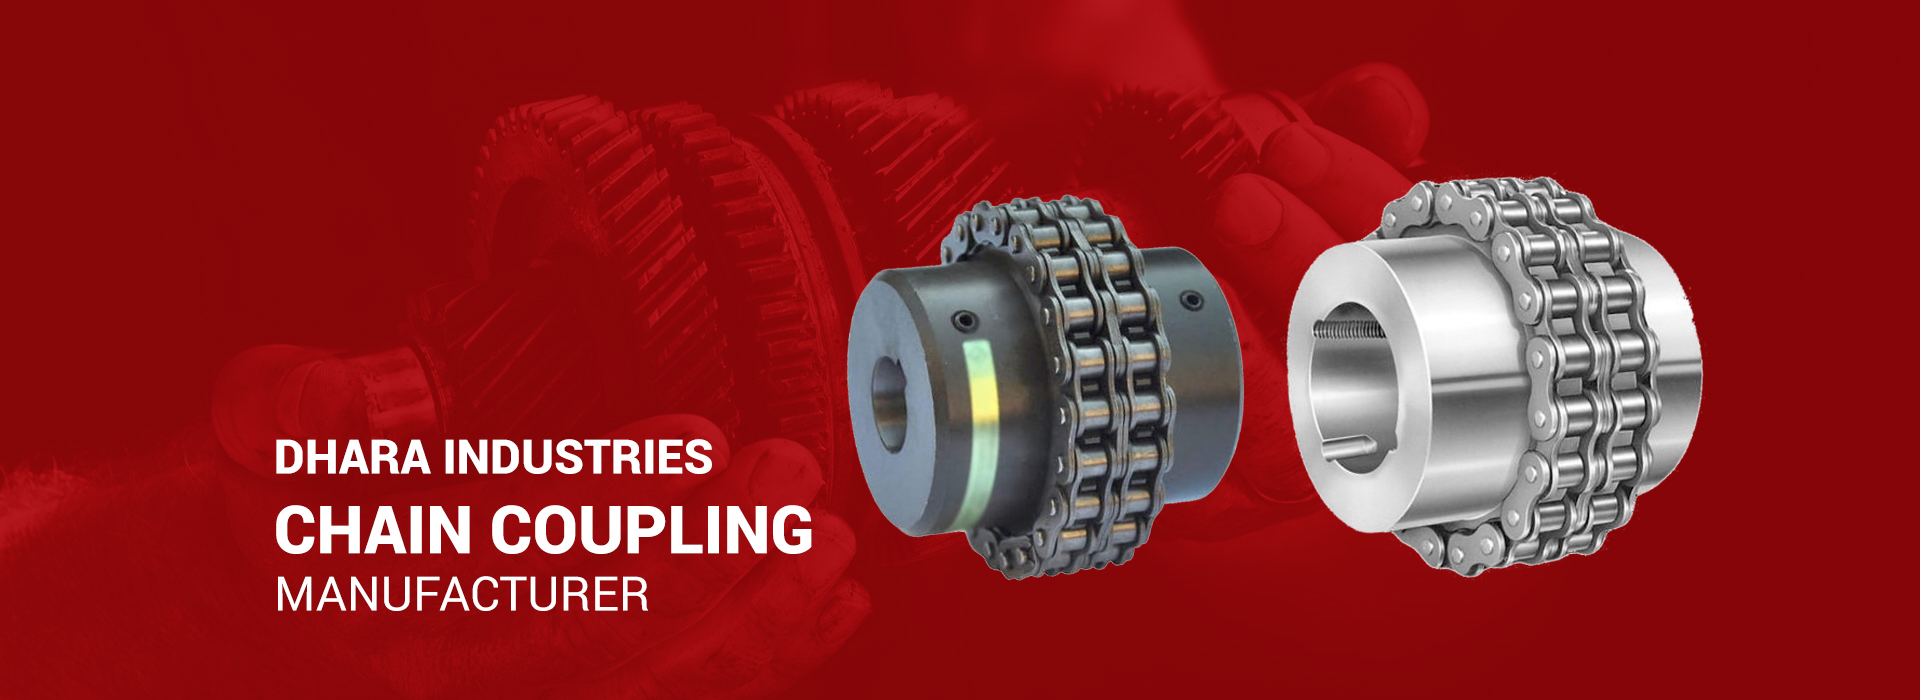 Chain Coupling Manufacturer